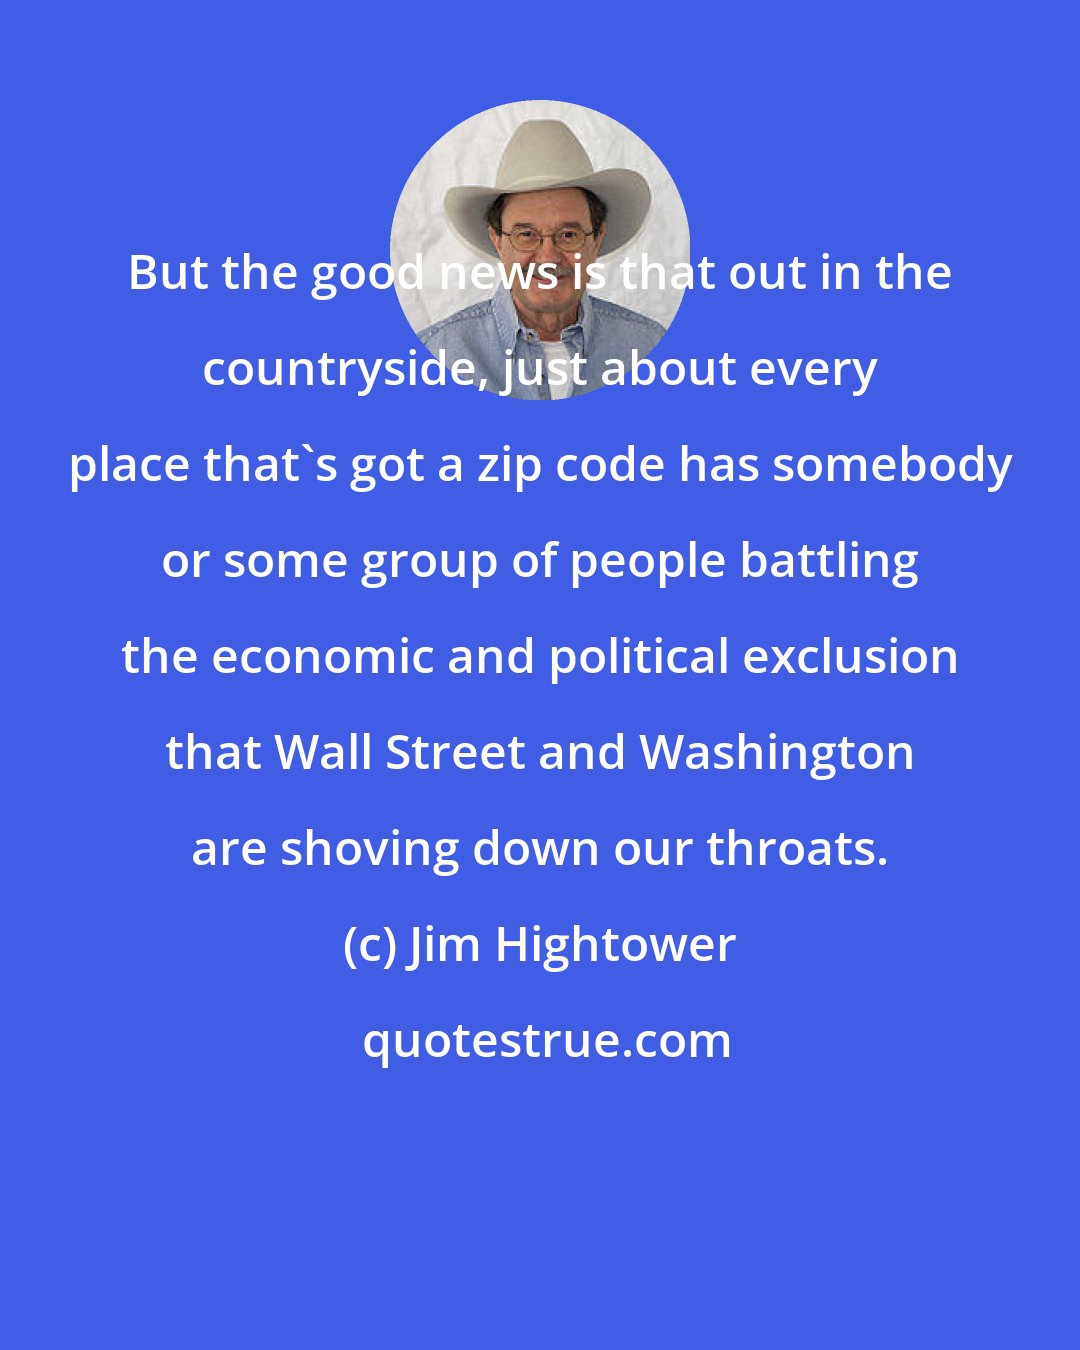 Jim Hightower: But the good news is that out in the countryside, just about every place that's got a zip code has somebody or some group of people battling the economic and political exclusion that Wall Street and Washington are shoving down our throats.